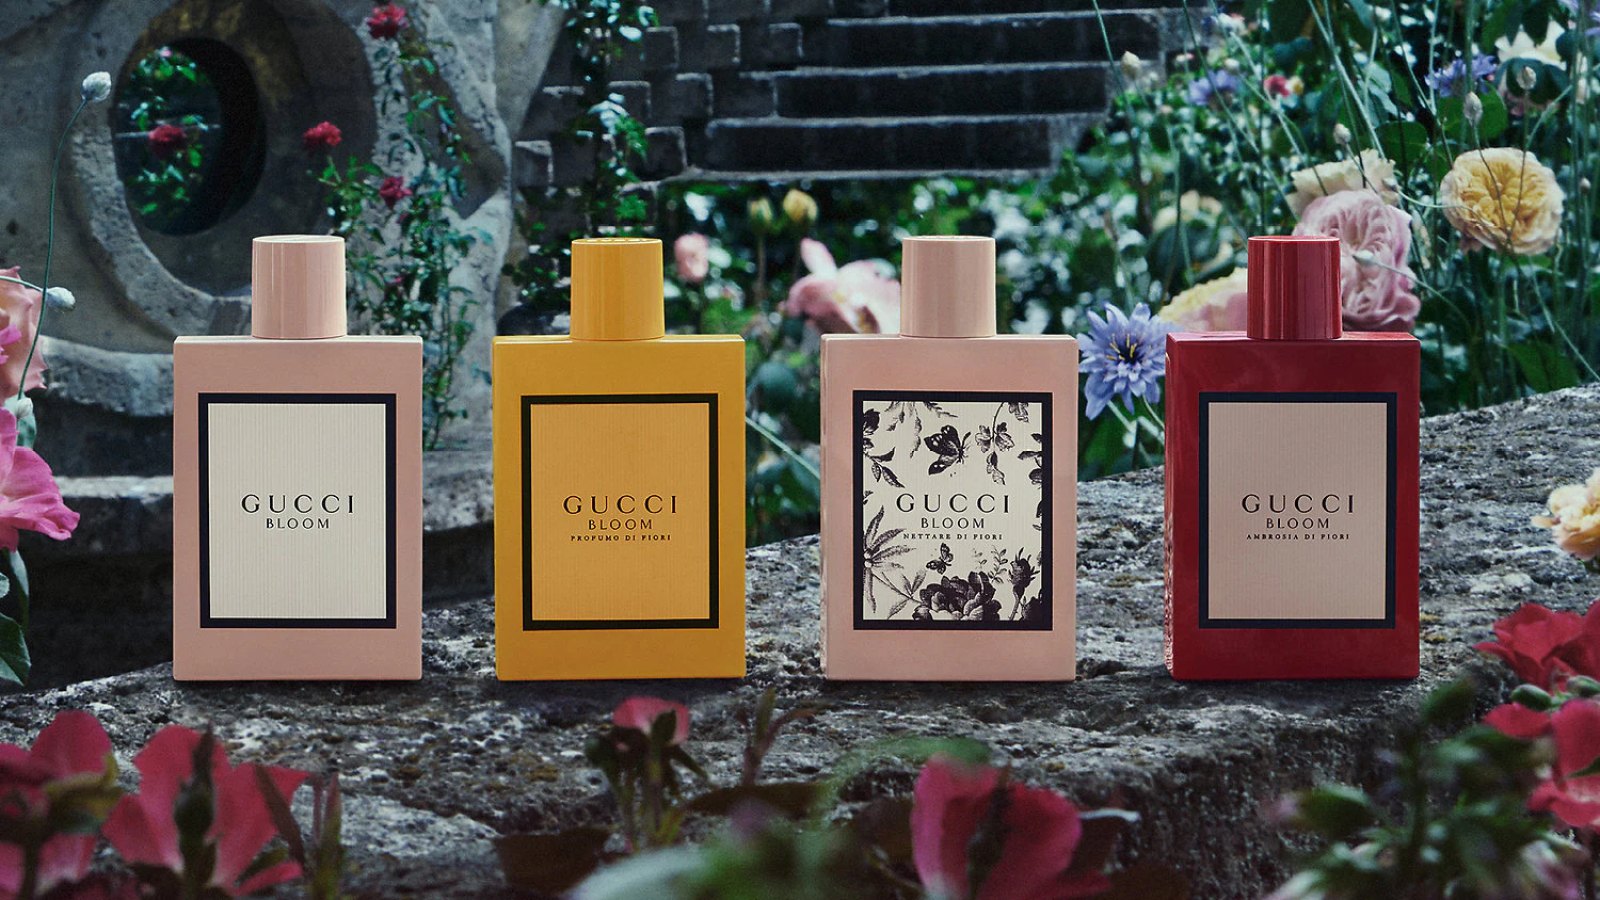 The 10 best luxury fragrances for women to give as gifts